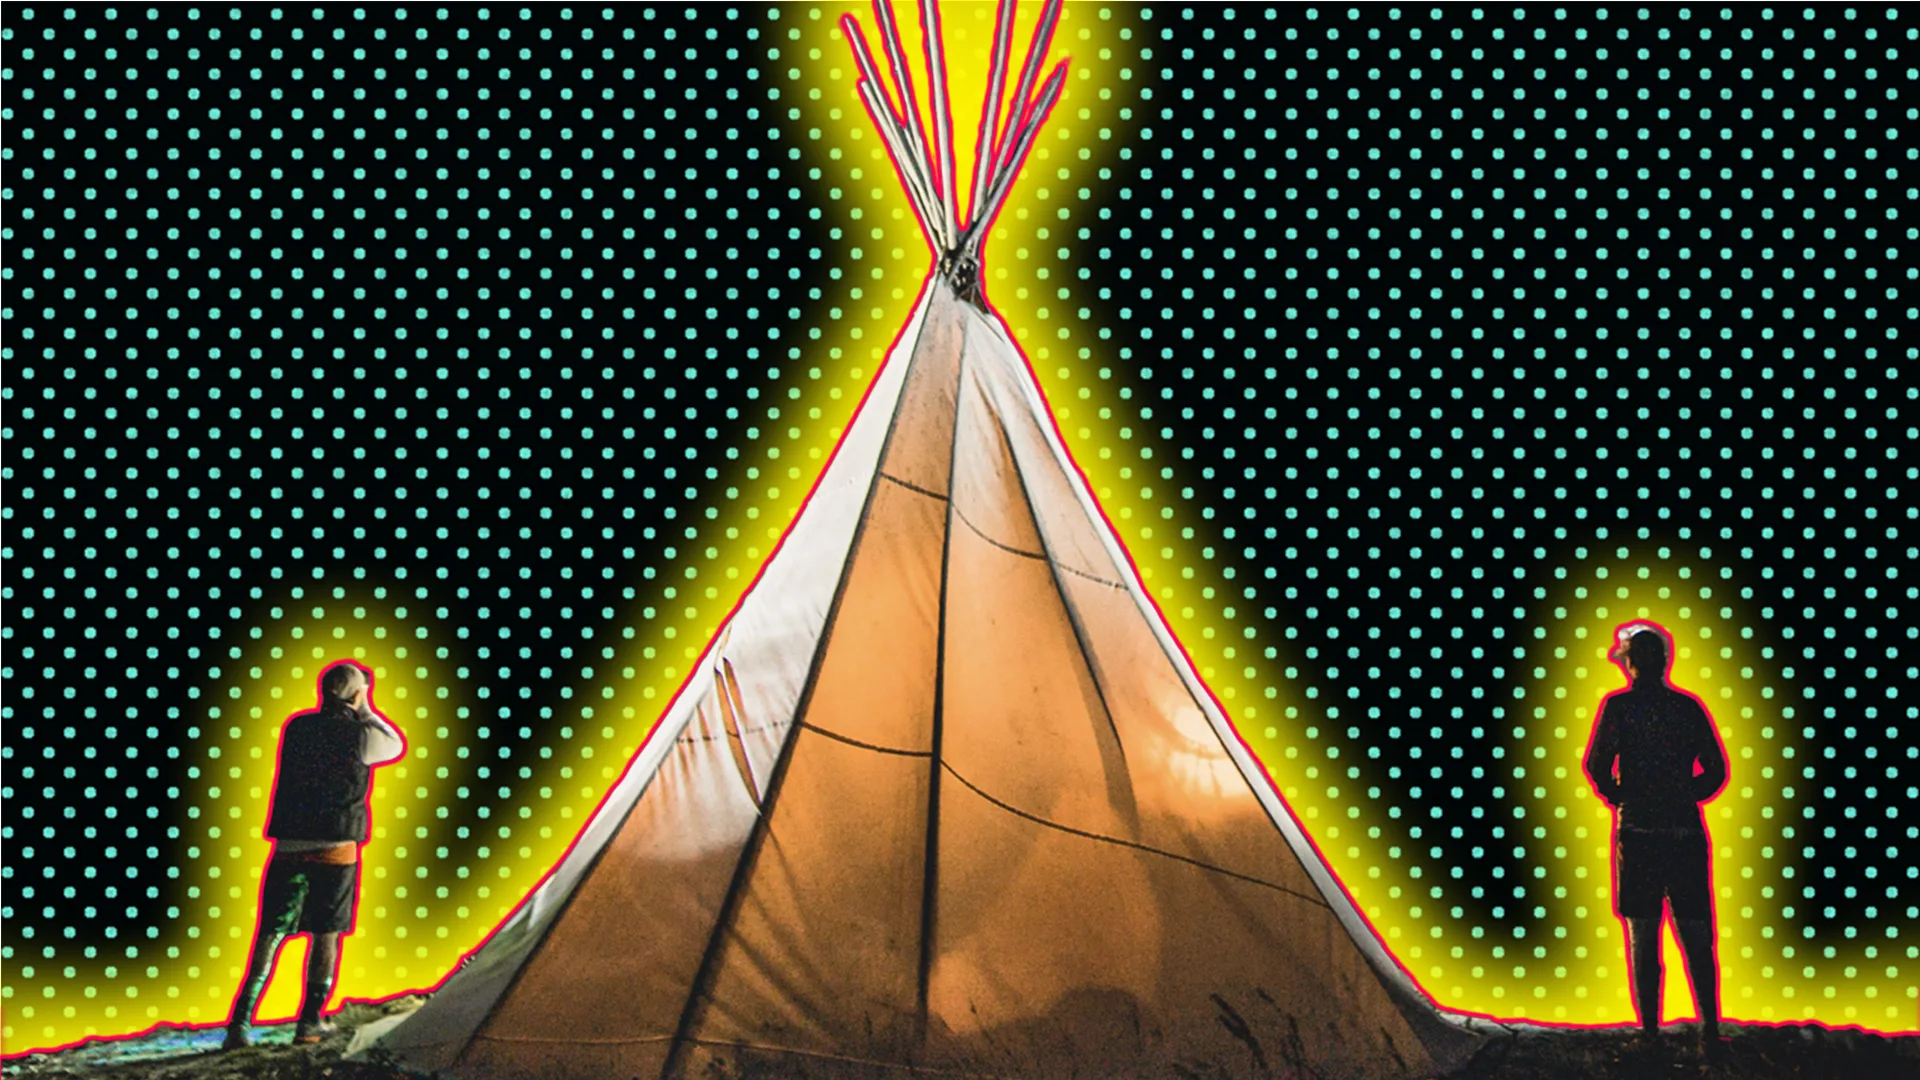 People camping with a teepee with a polkadot background and a glow around the image